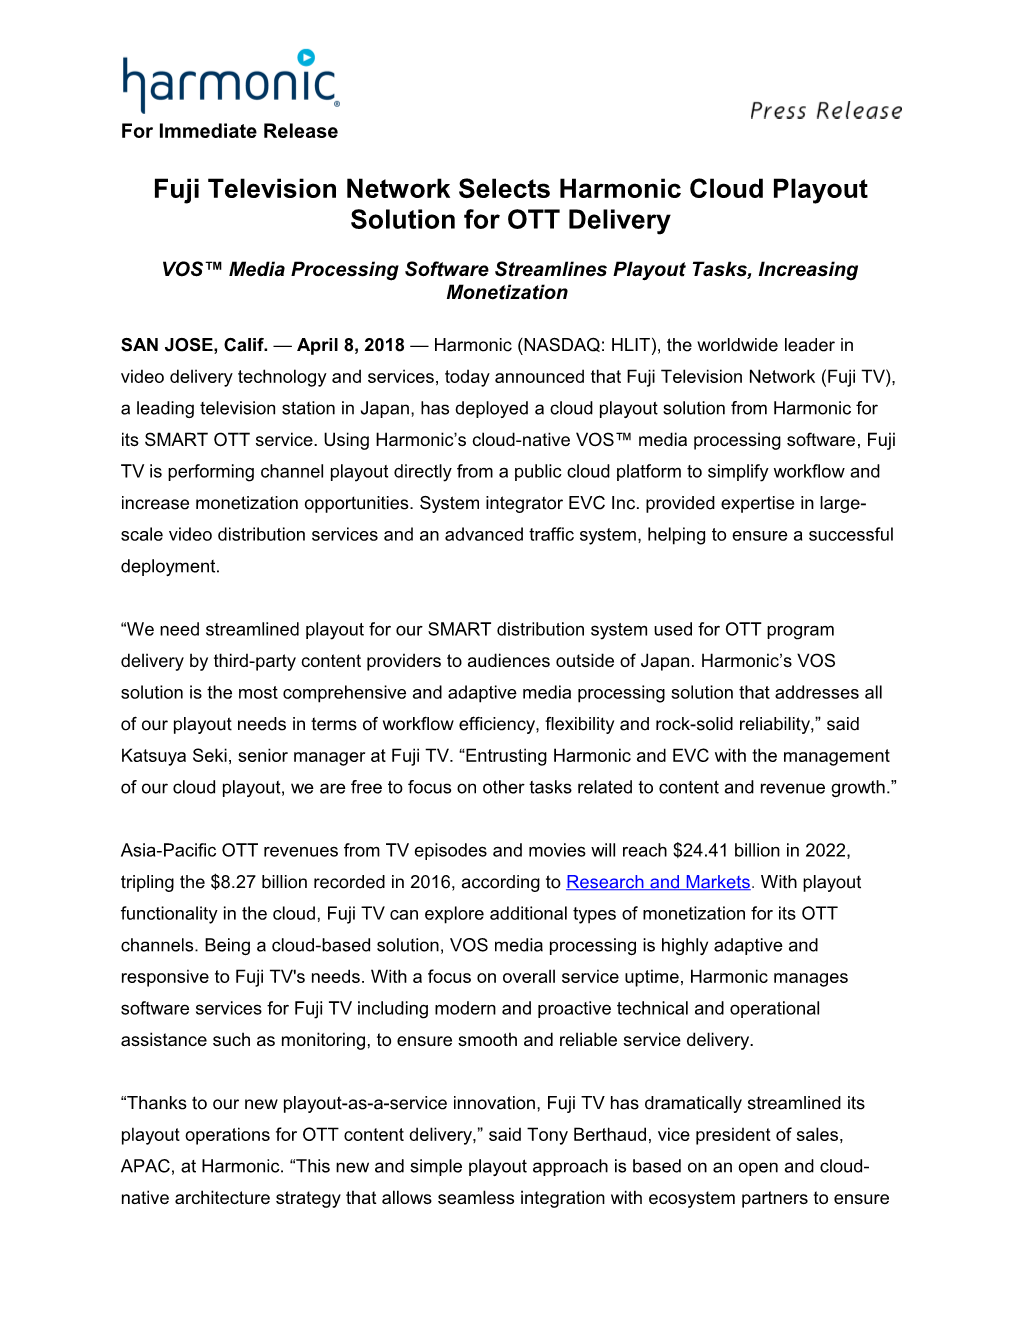 Fuji Television Network Selects Harmonic Cloud Playout Solution for OTT Delivery